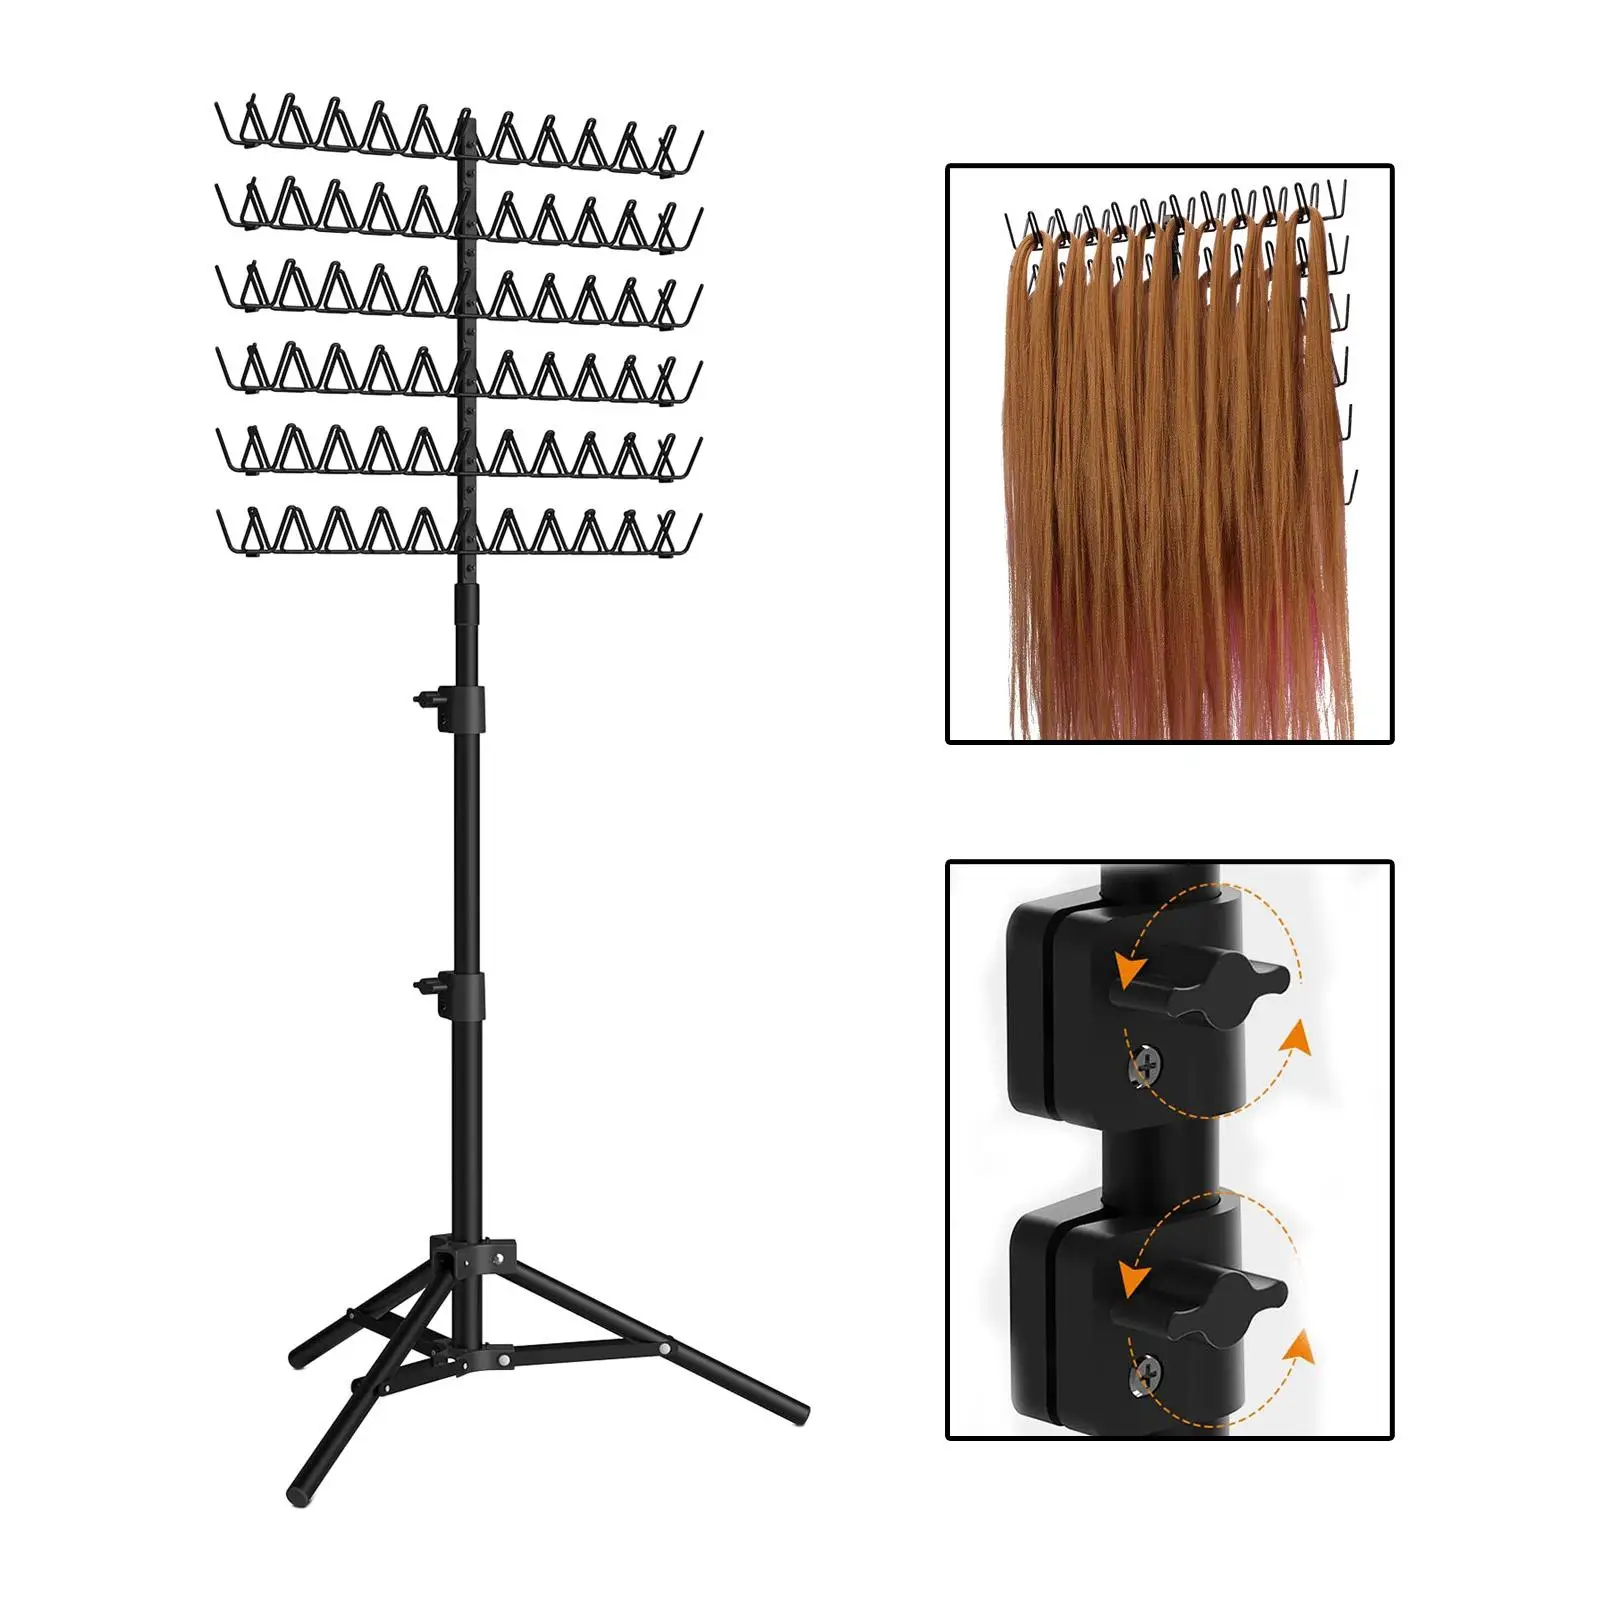 

Hair Braiding Rack Stable Keep Tidy Save Time and Prevent Tangles for Salon Home 2 Side Hair Display Stand 43.31 to 59.06 Inches